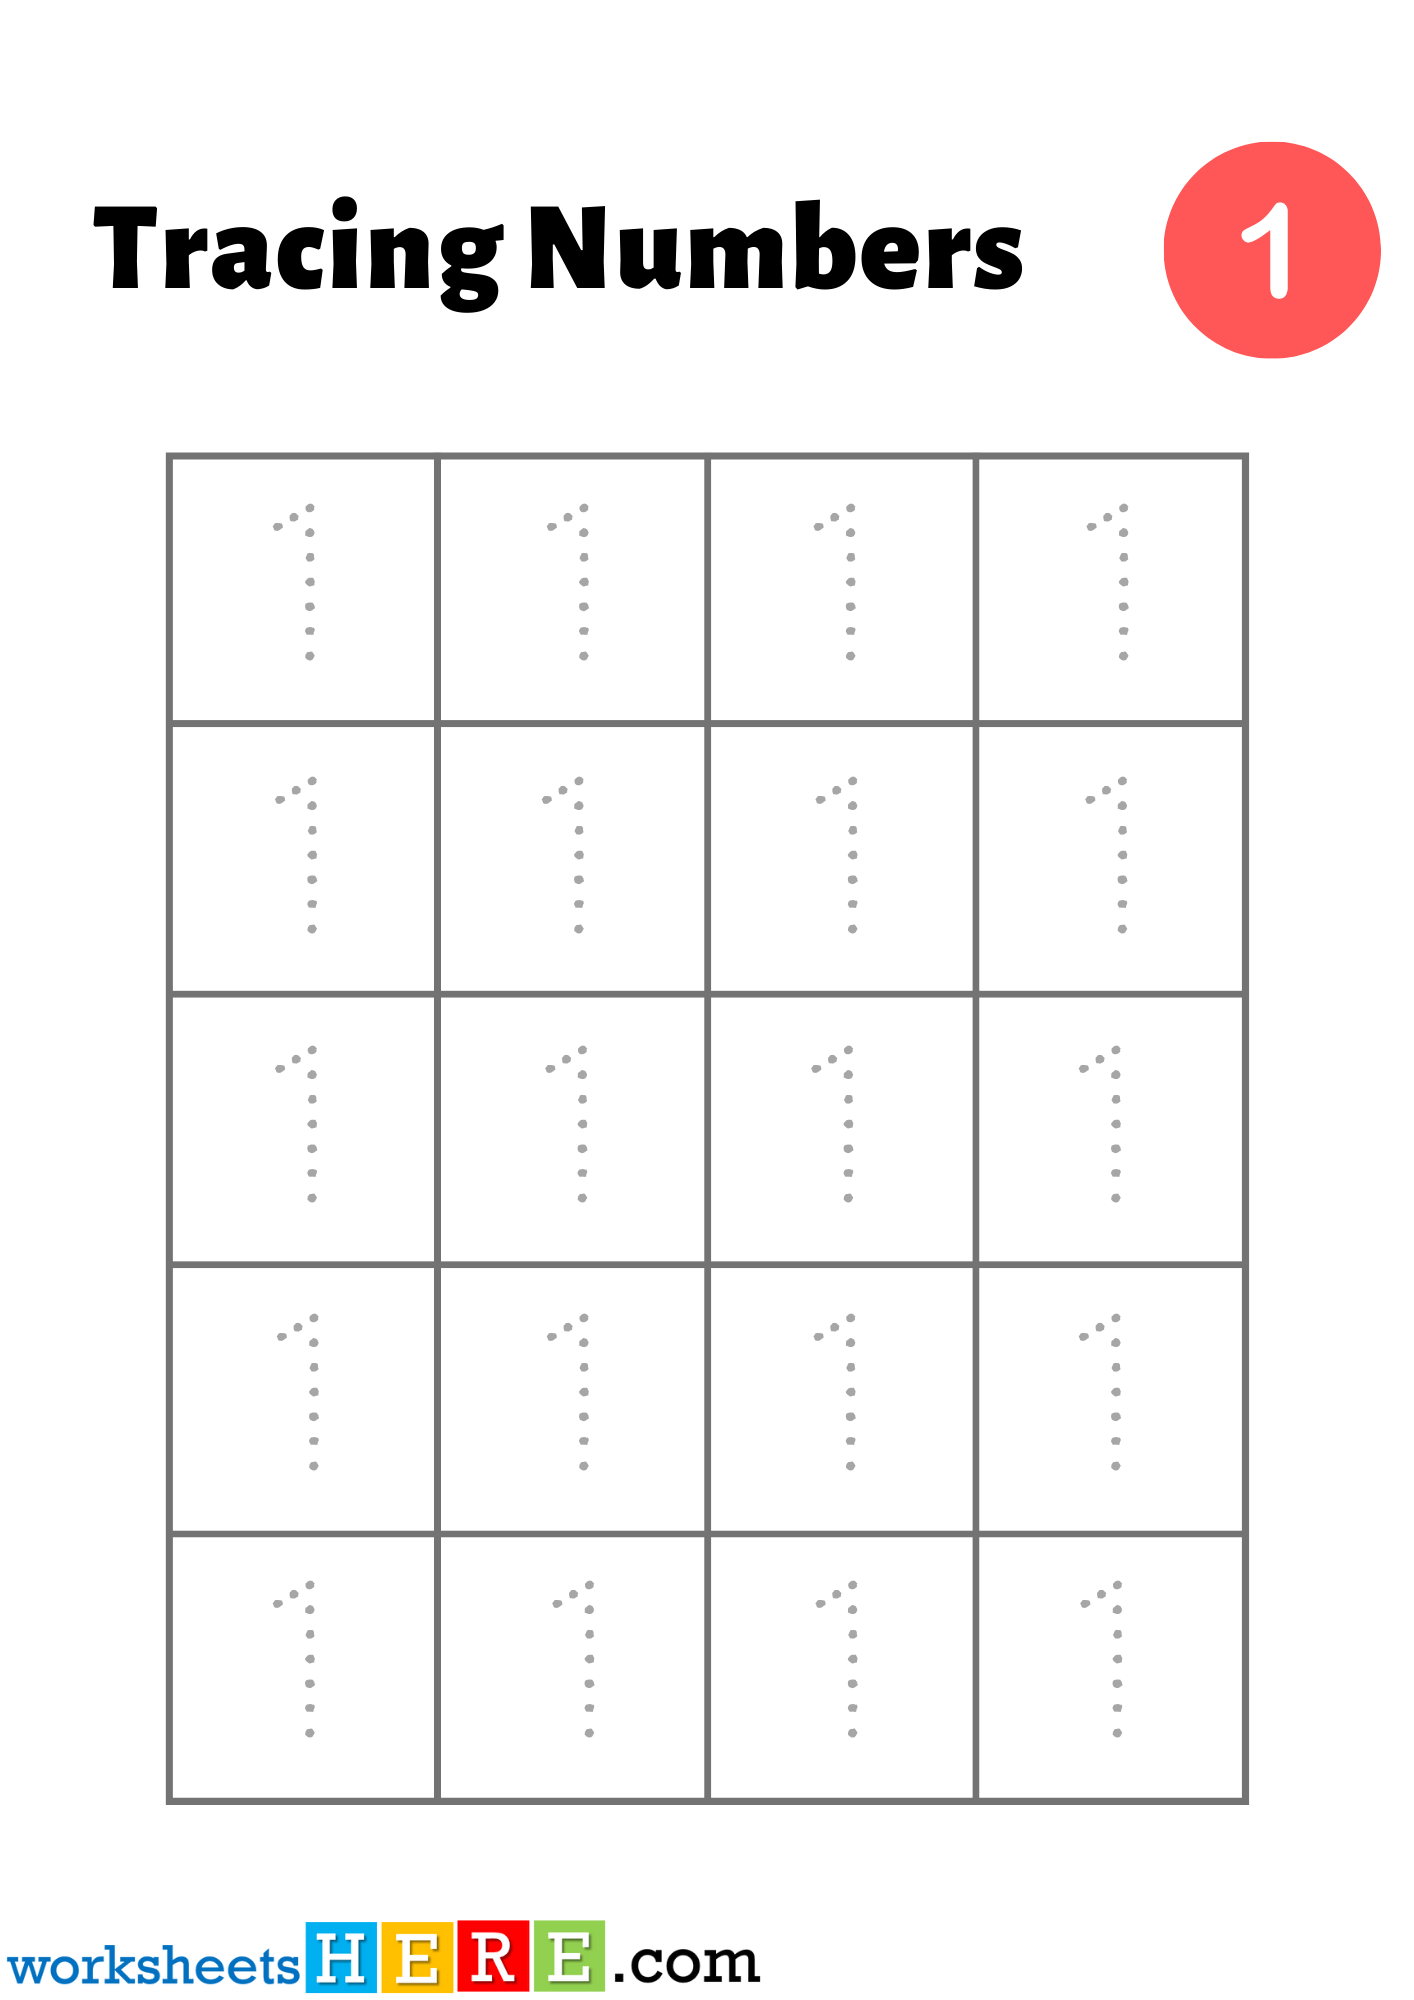 Tracing Numbers Activity, Number 1 Trace Pdf Worksheets For Kids